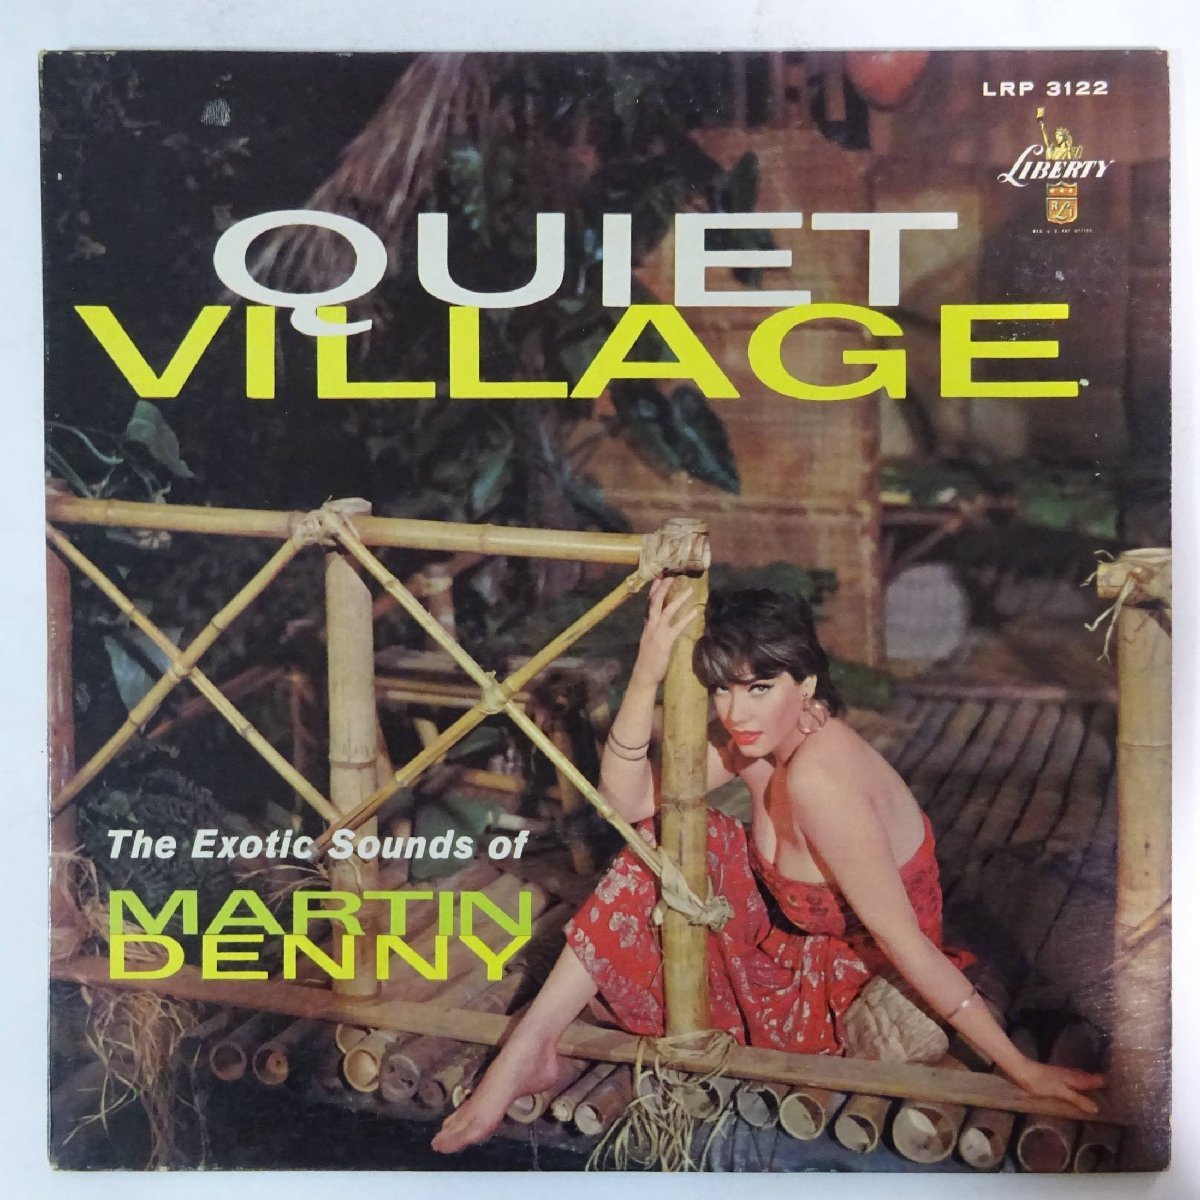 14029861;【US盤/LIBERTY/虹ラベル/深溝】Martin Denny / Quiet Village - The Exotic Sounds Of Martin Denny_画像1